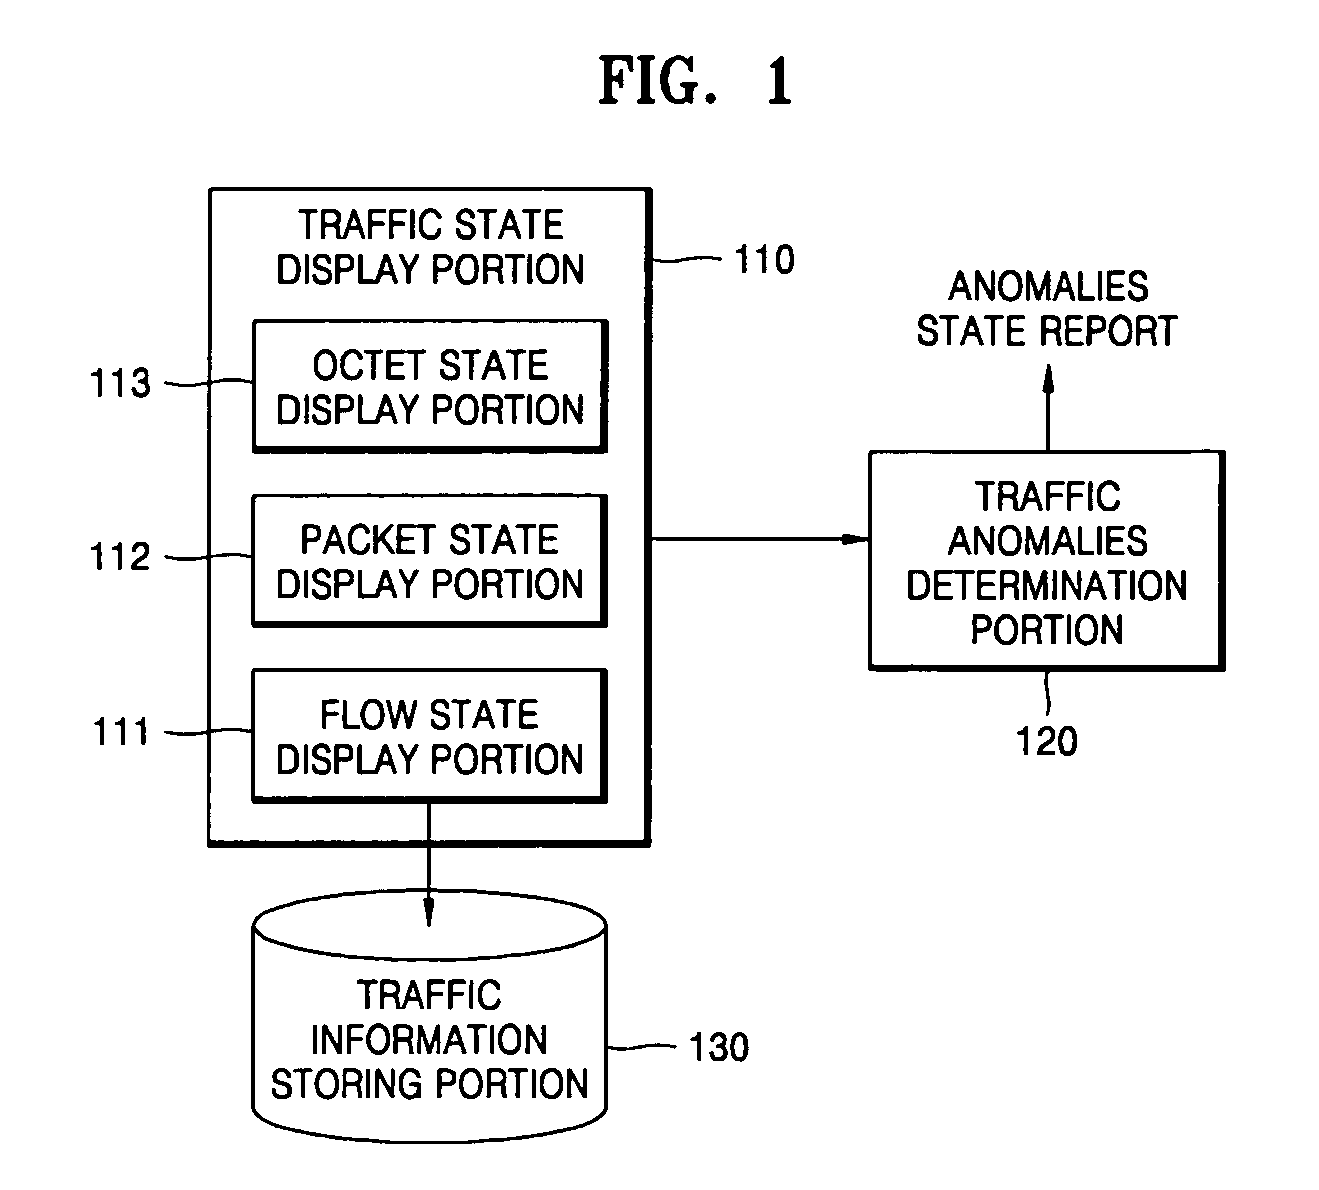 Apparatus and method for detecting and visualizing anomalies in network traffic